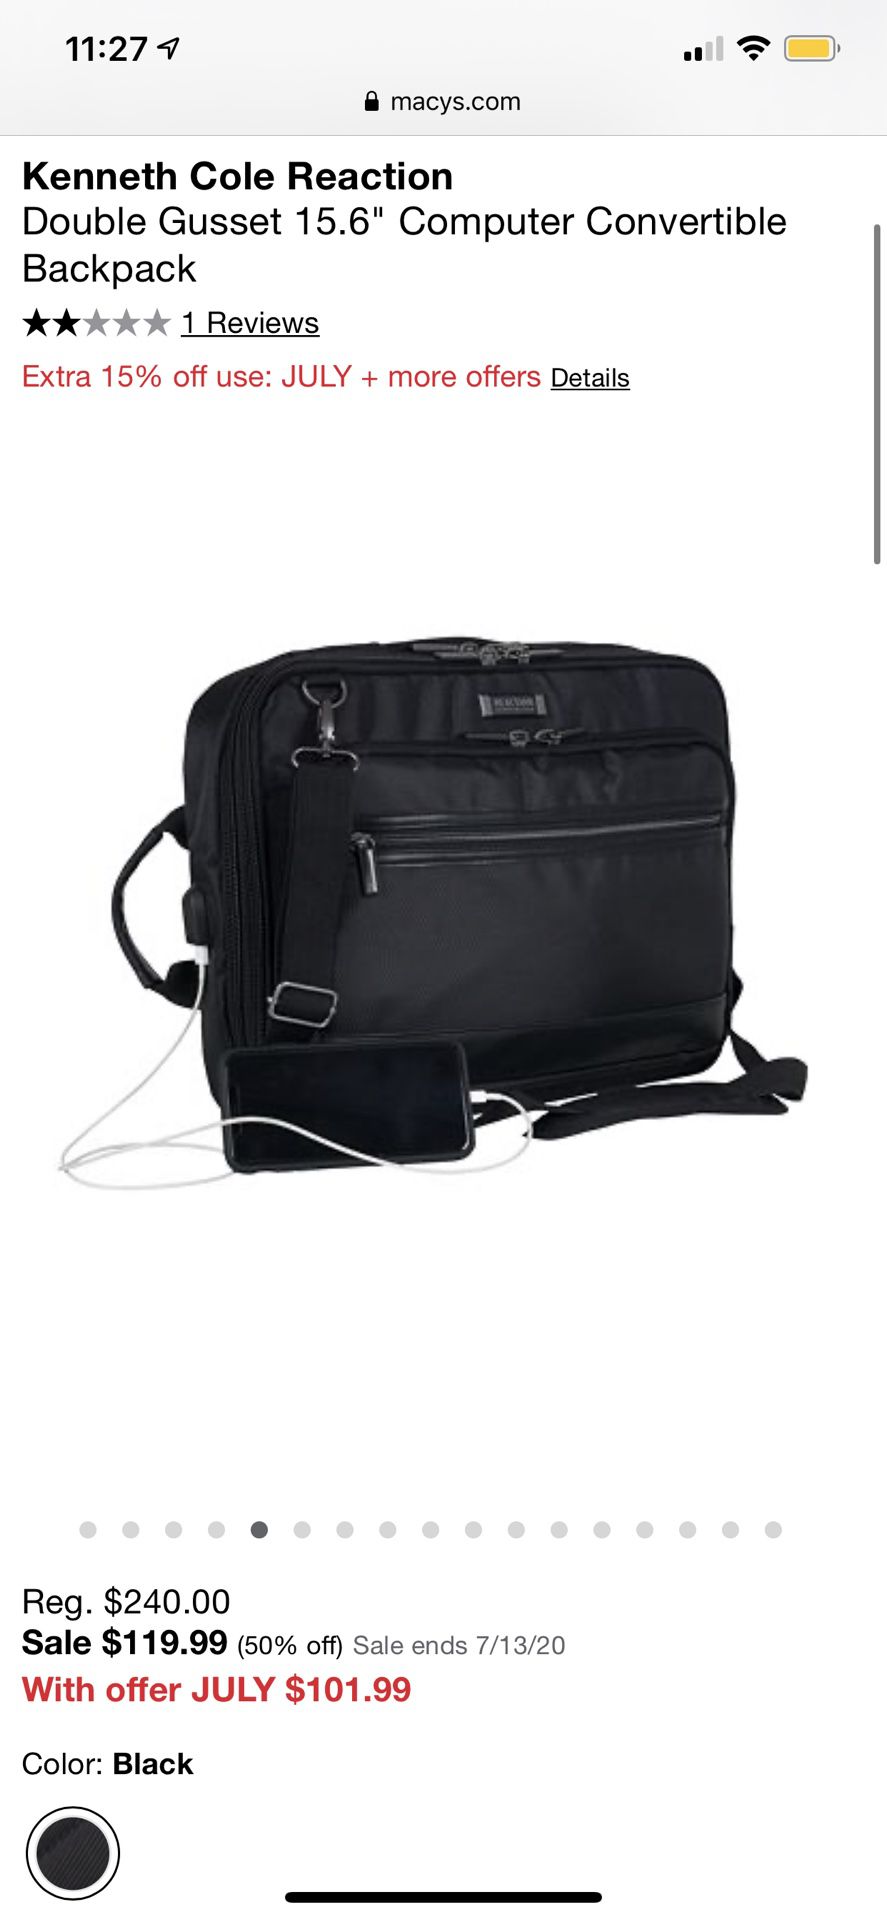 Kenneth Cole Reaction Convertible Laptop Case and Backpack